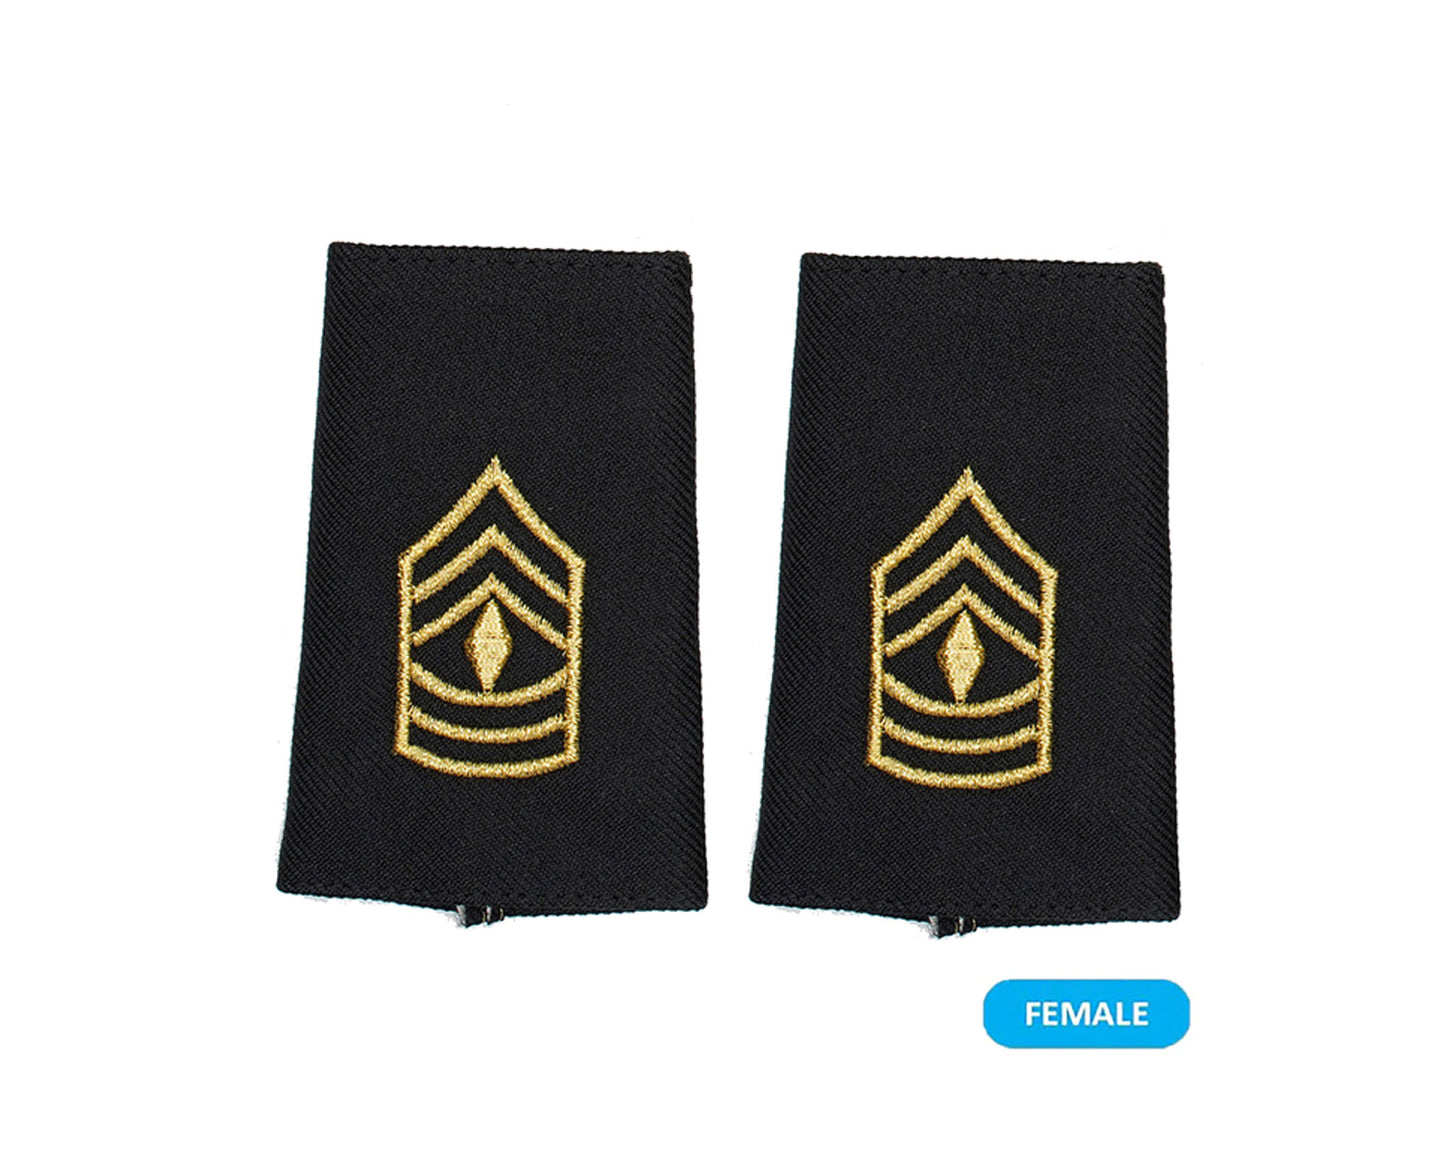 US Army E8 First Sergeant Shoulder Marks - Small/Female